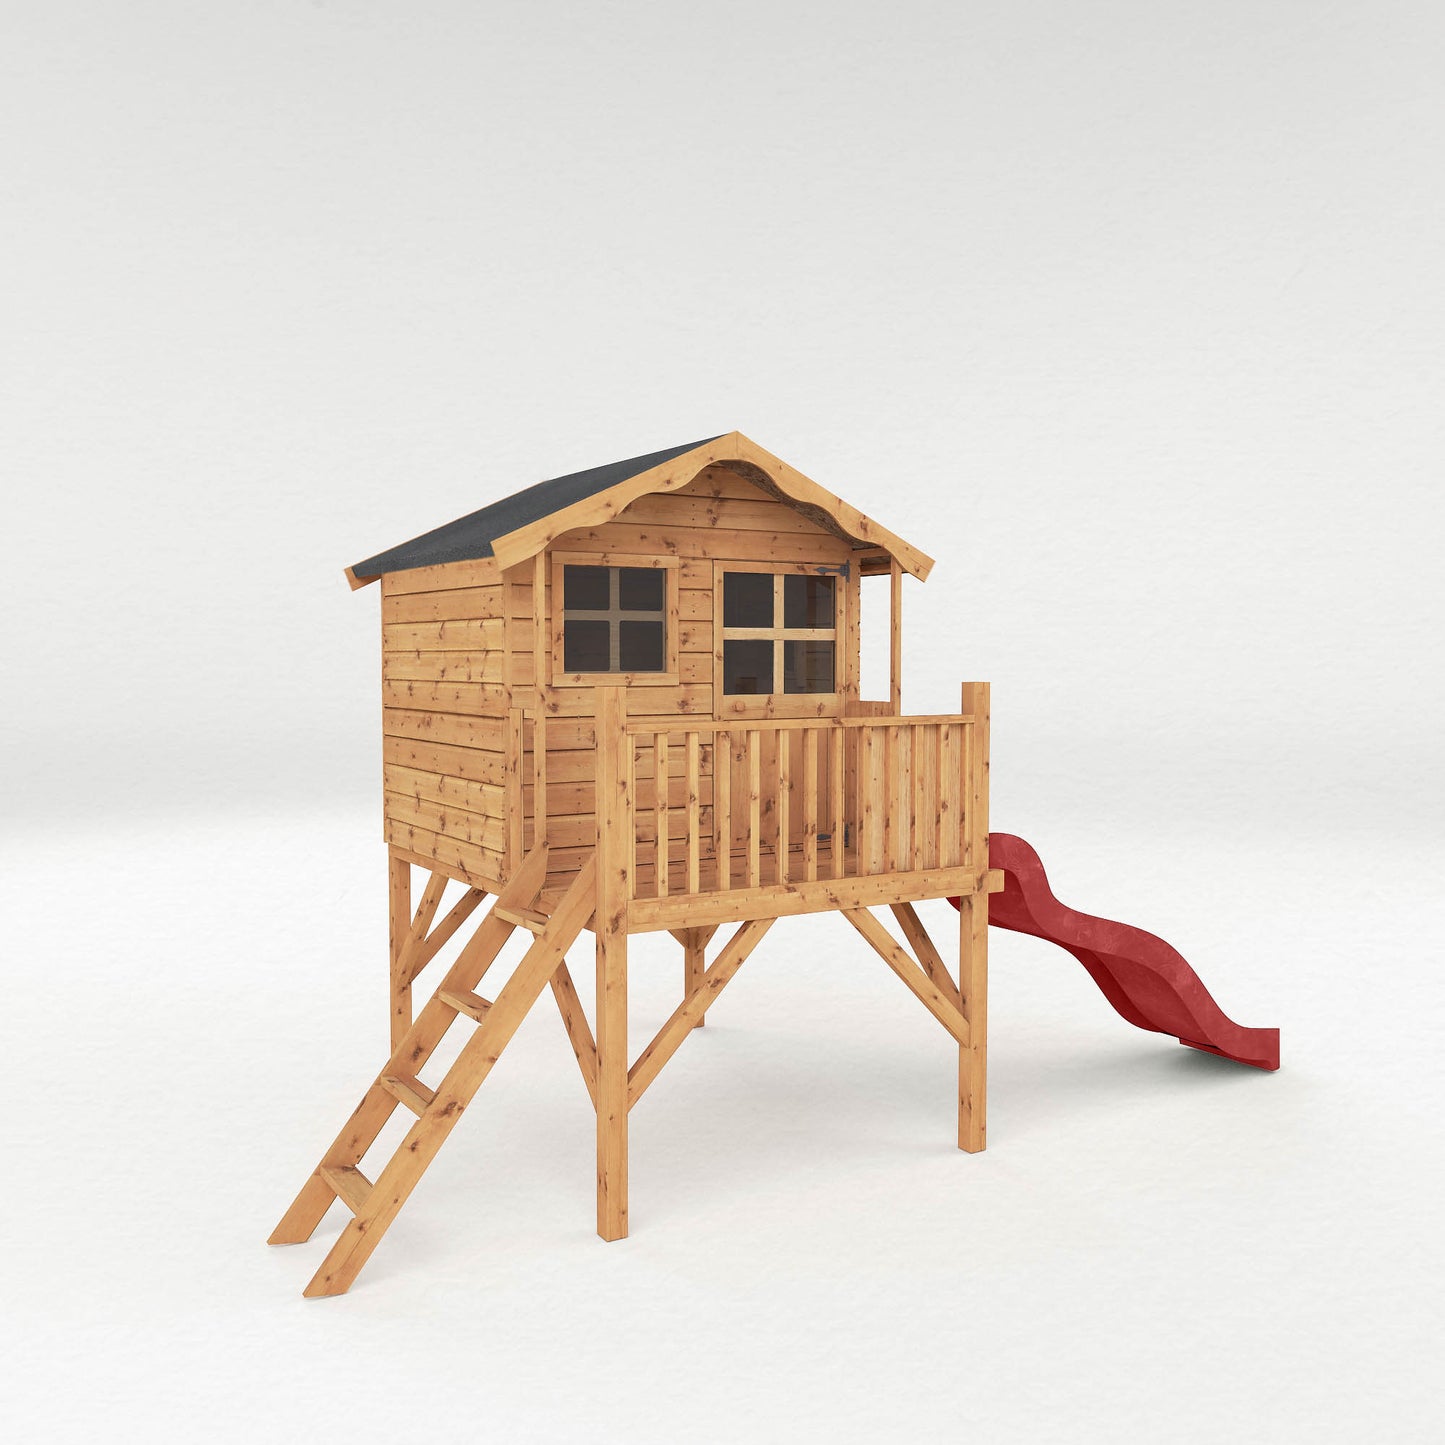 Poppy Tower Wooden Playhouse with Slide